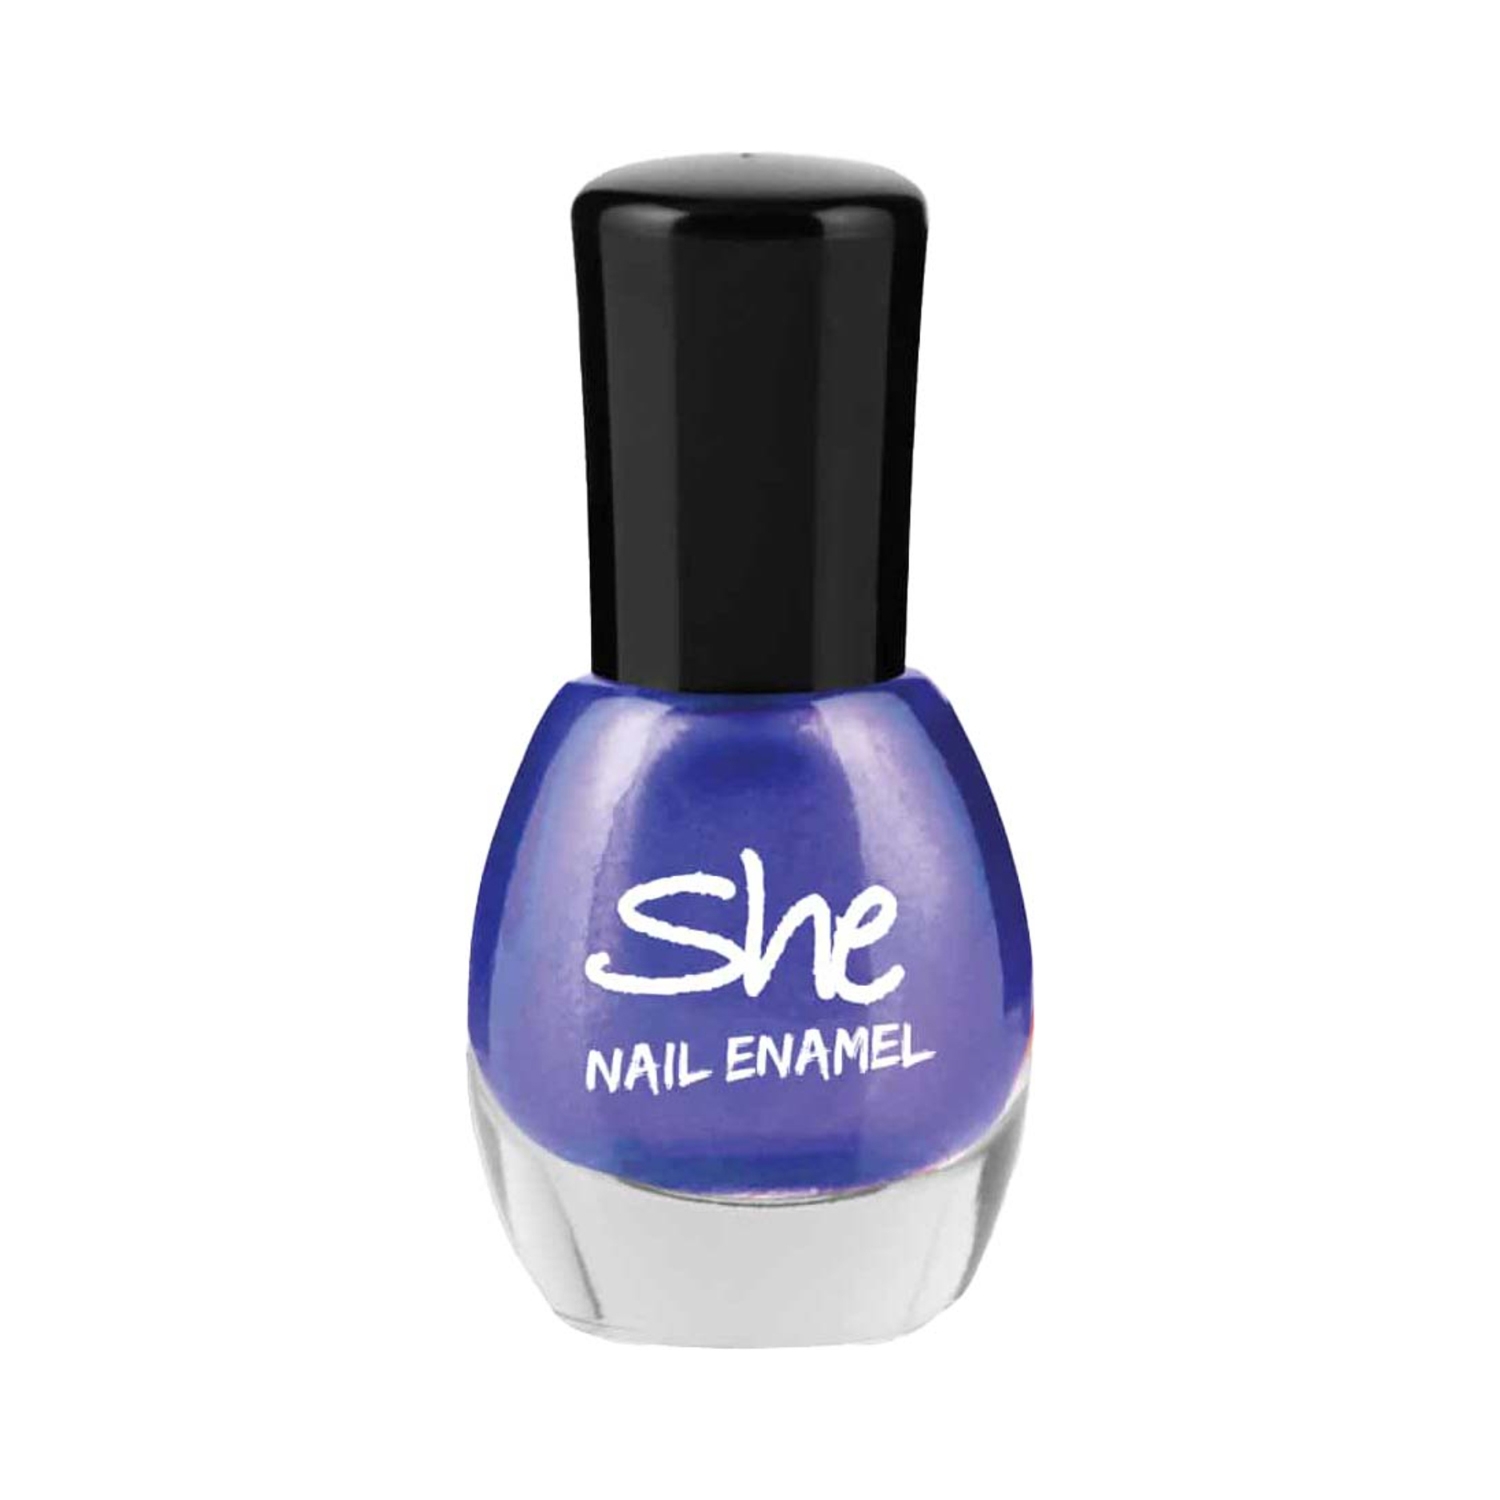 The Best Shades Of Blue Nail Polish | Into The Gloss